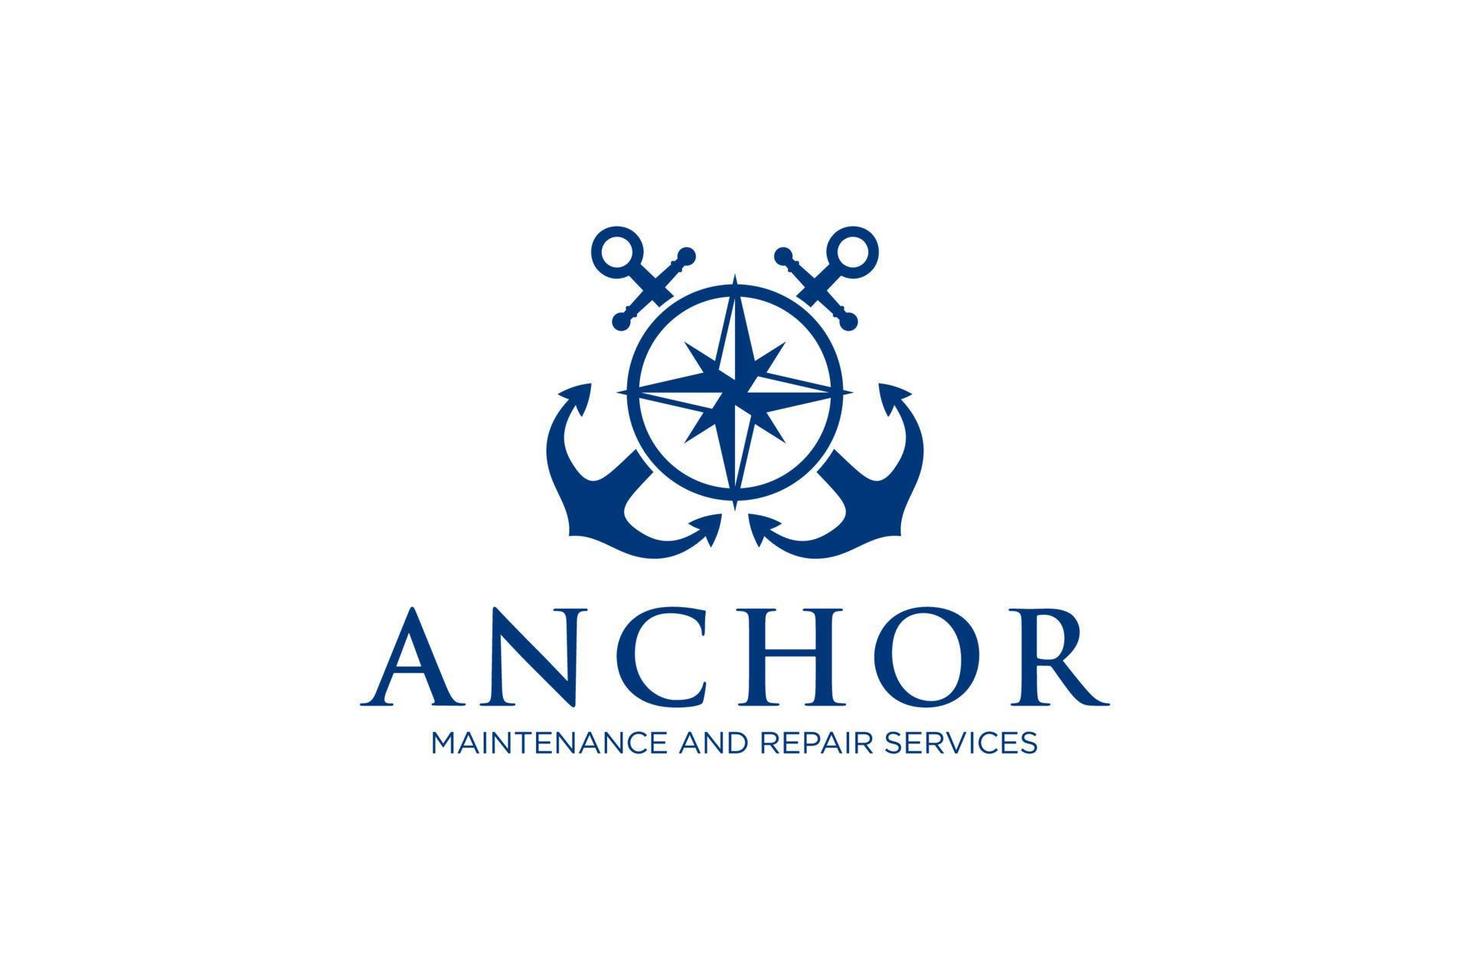 Anchor Logo. Blue Geometric Style isolated on White Background. Usable for Business, Maintenance, repair services and Branding Logos. Flat Vector Logo Design Template Element.